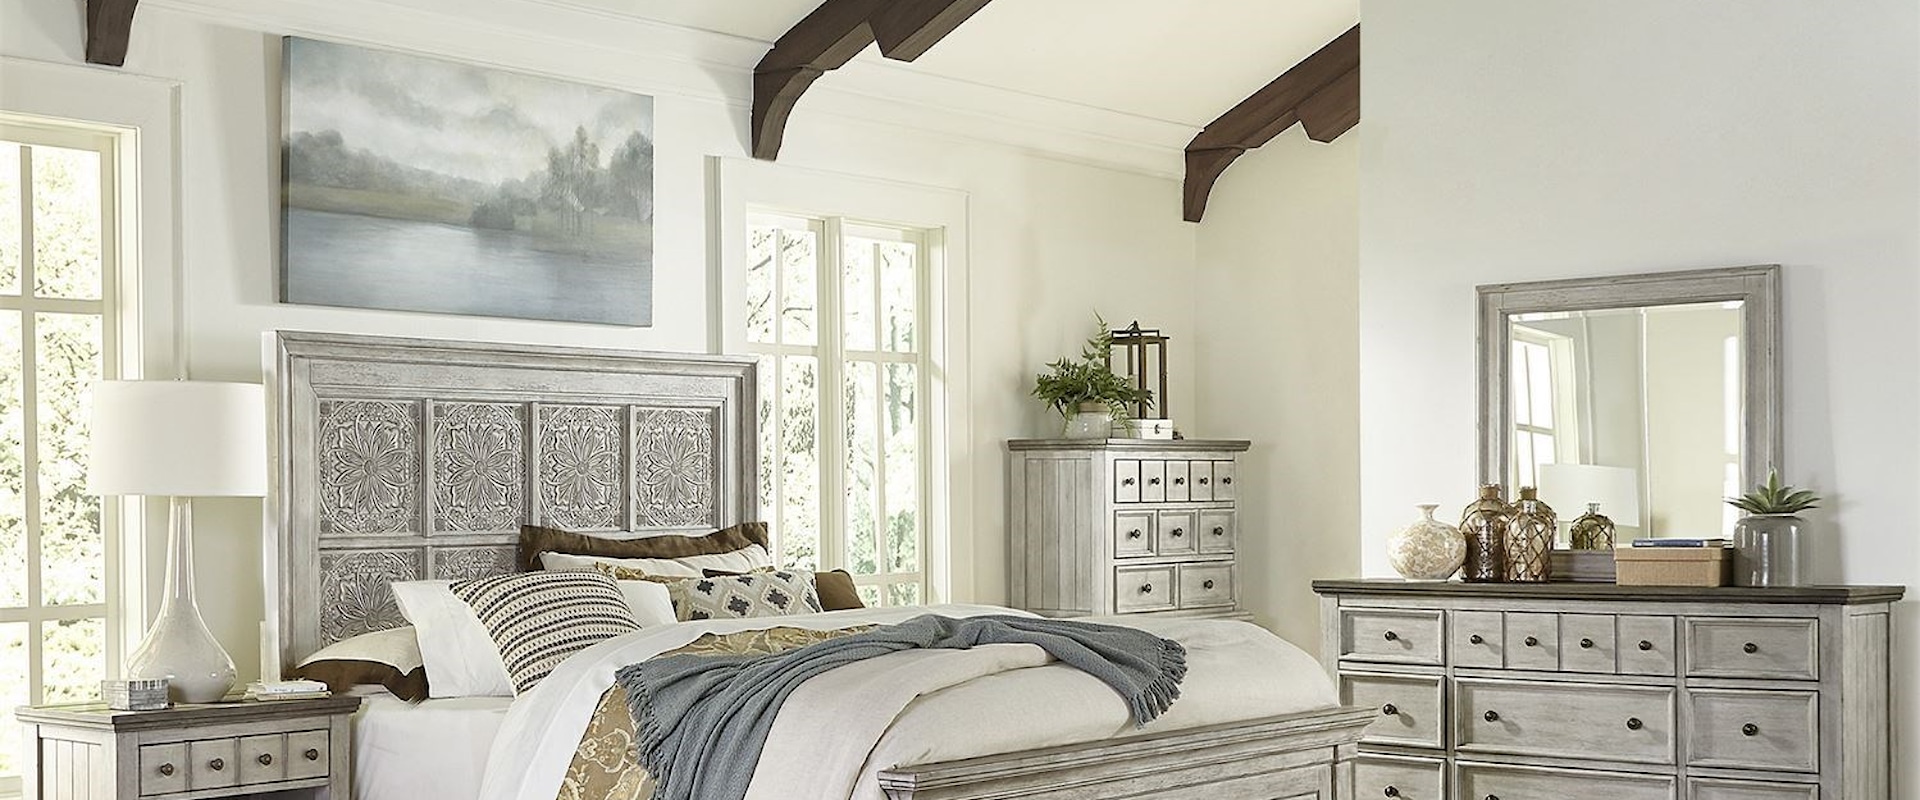 Farmhouse 5-Piece Queen Bedroom Group with Decorative Headboard